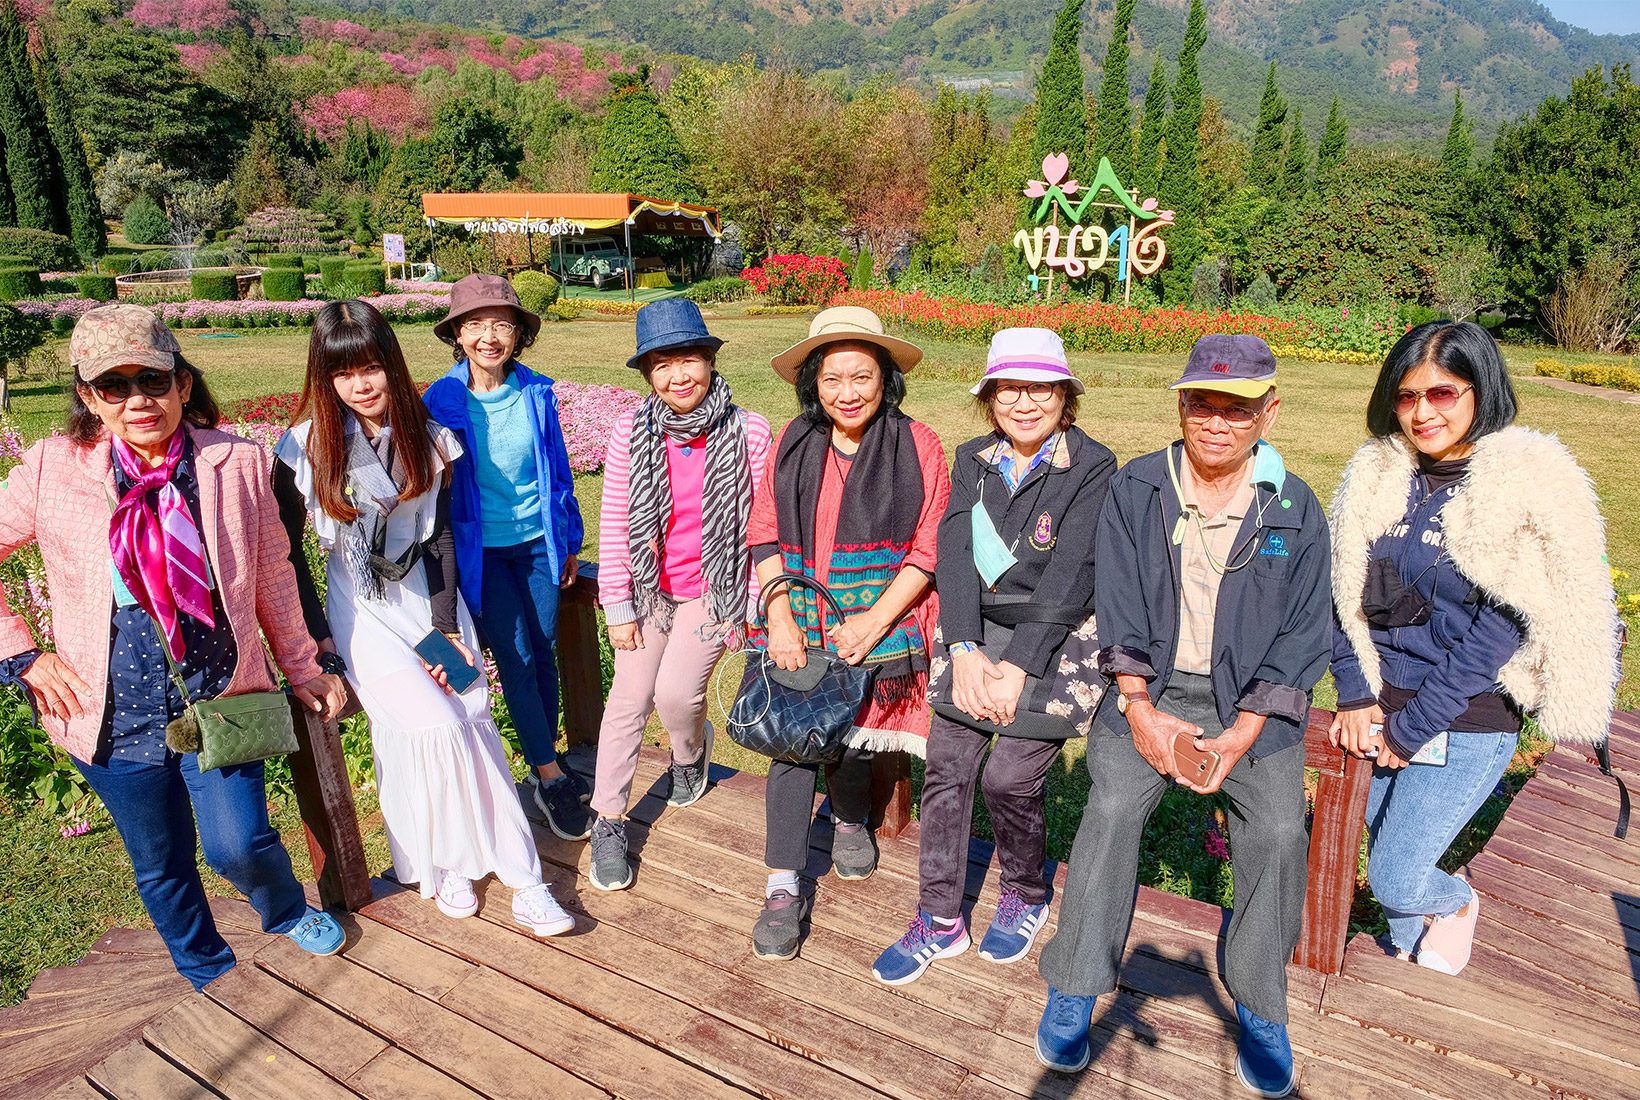 Photo opp for our group at the formal gardens of the Royal Agricultural Research Center in Doi Inthanon National Park, Thailand